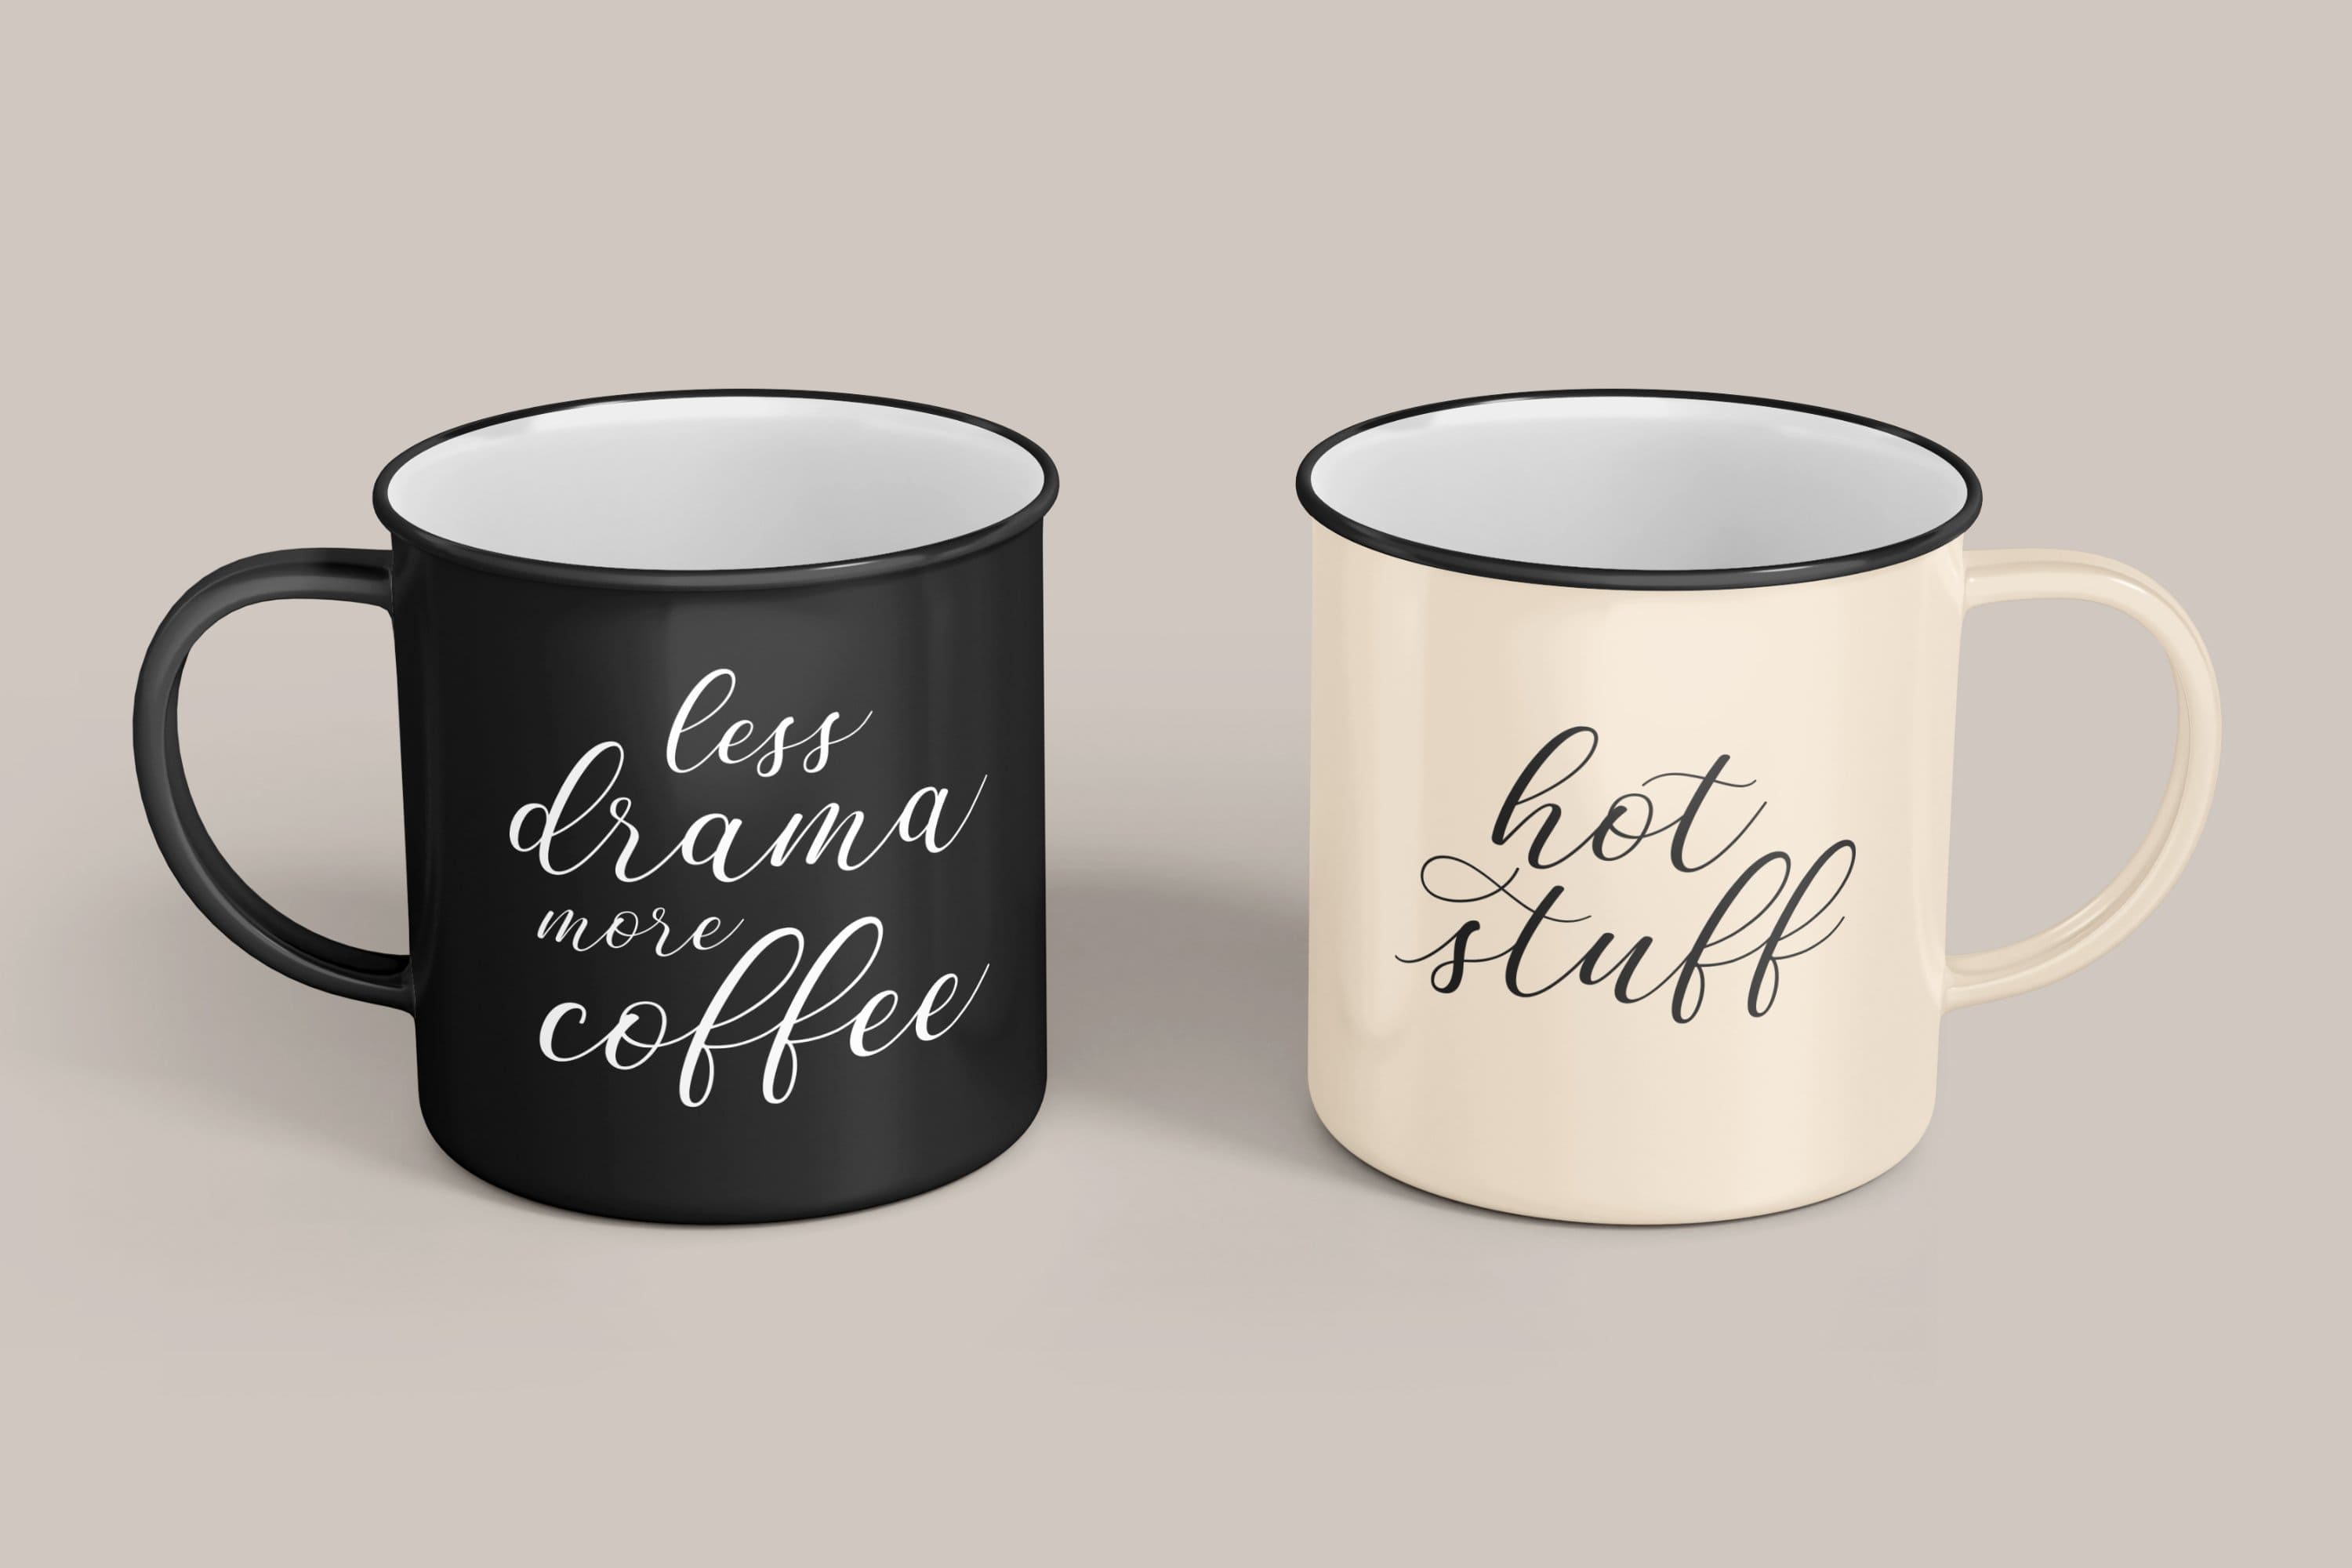 Two cups, black and white, with the words "less drama more coffee, hot stuff".